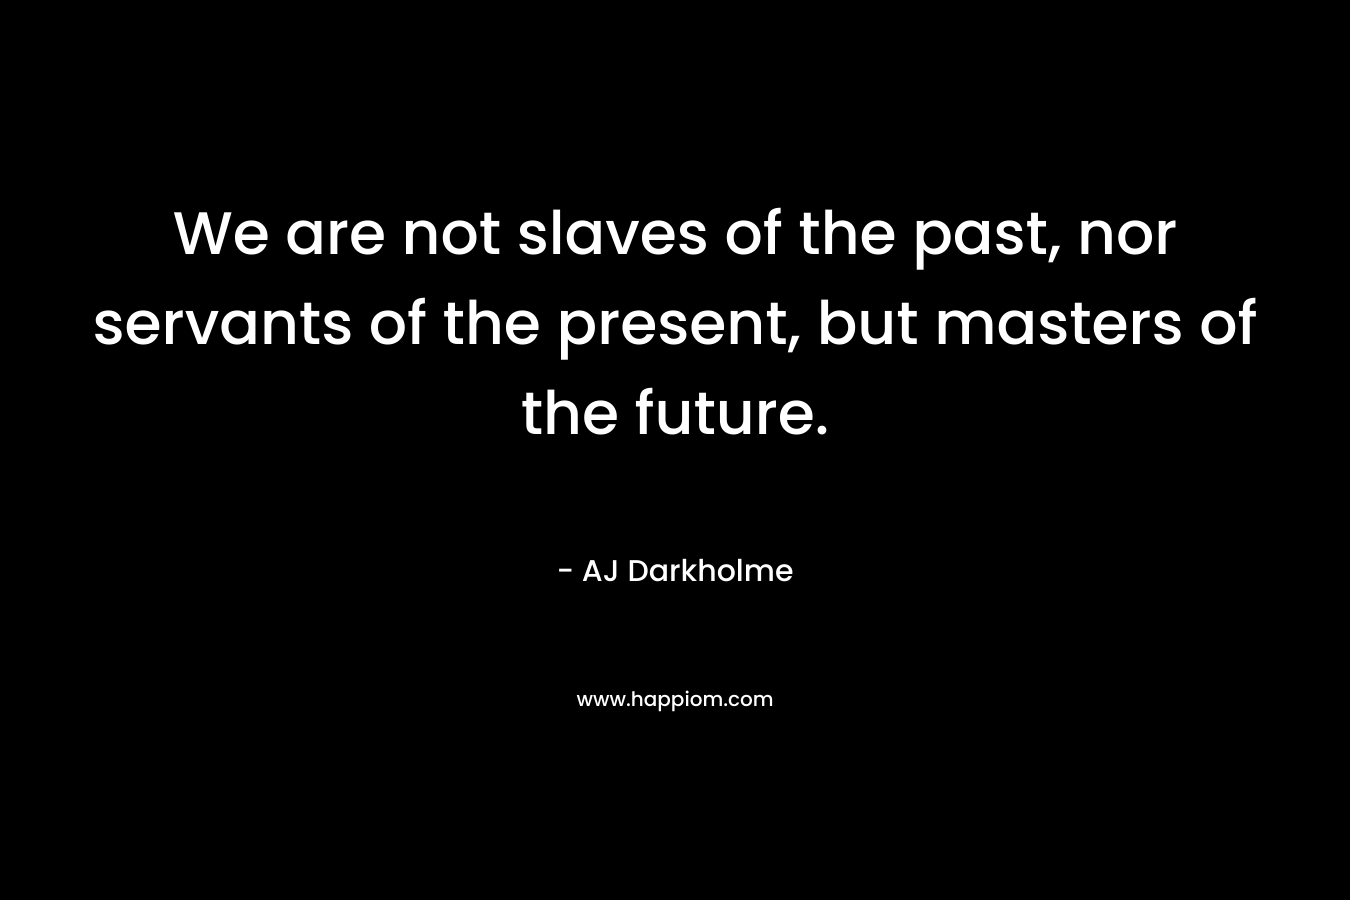 We are not slaves of the past, nor servants of the present, but masters of the future. – AJ Darkholme